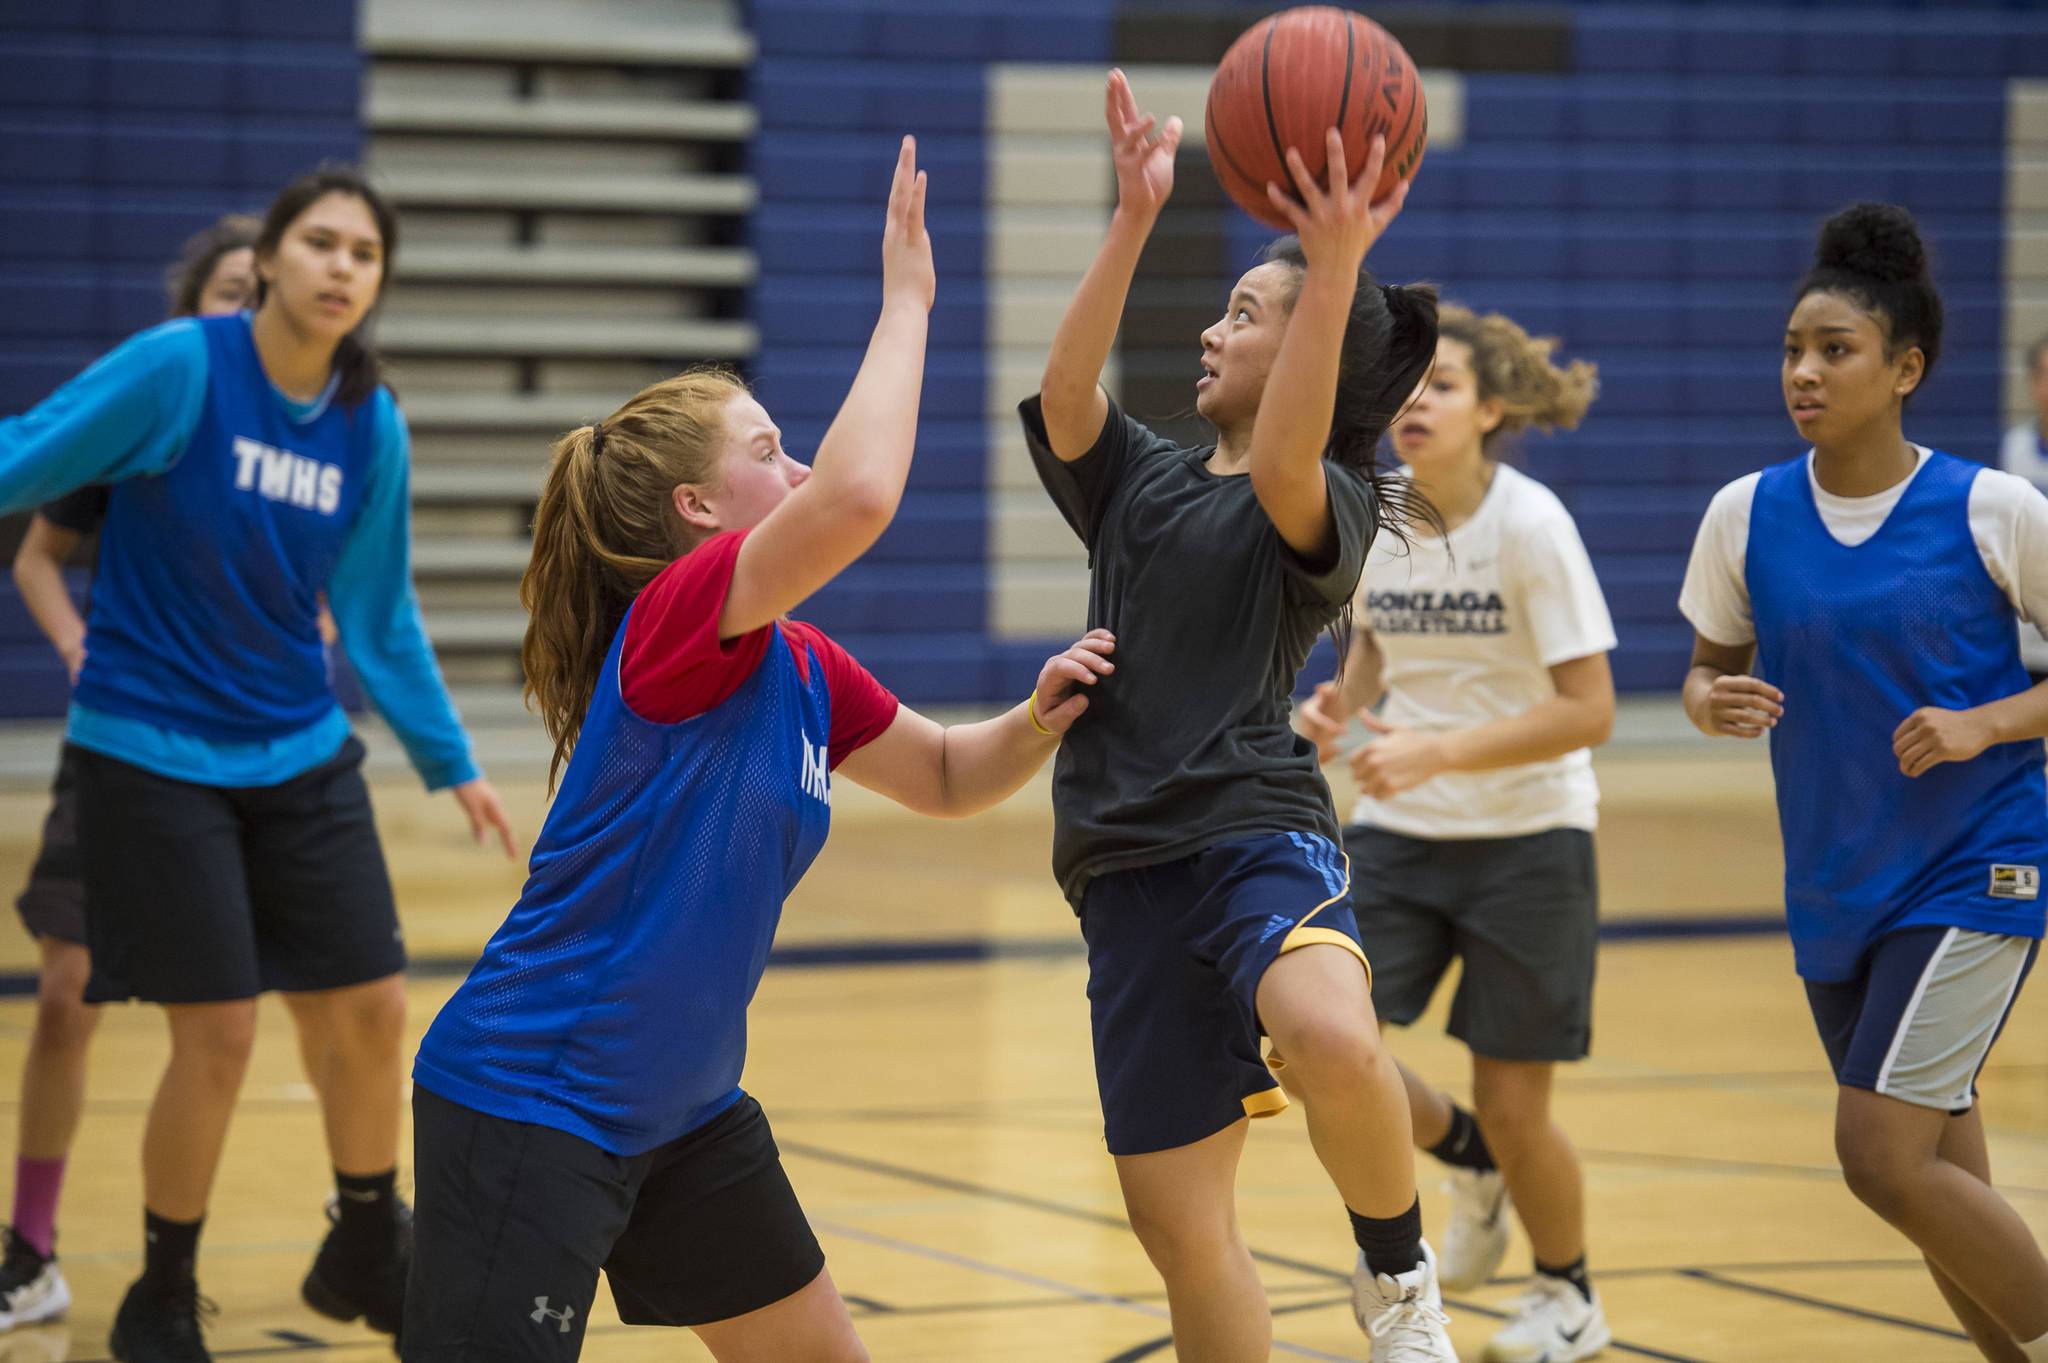 Mary Khaye Garcia shoots over teammate Sydney Strong during early morning girls basketball practice at Thunder Mountain High School on Tuesday, Dec. 11, 2018. (Michael Penn | Juneau Empire)